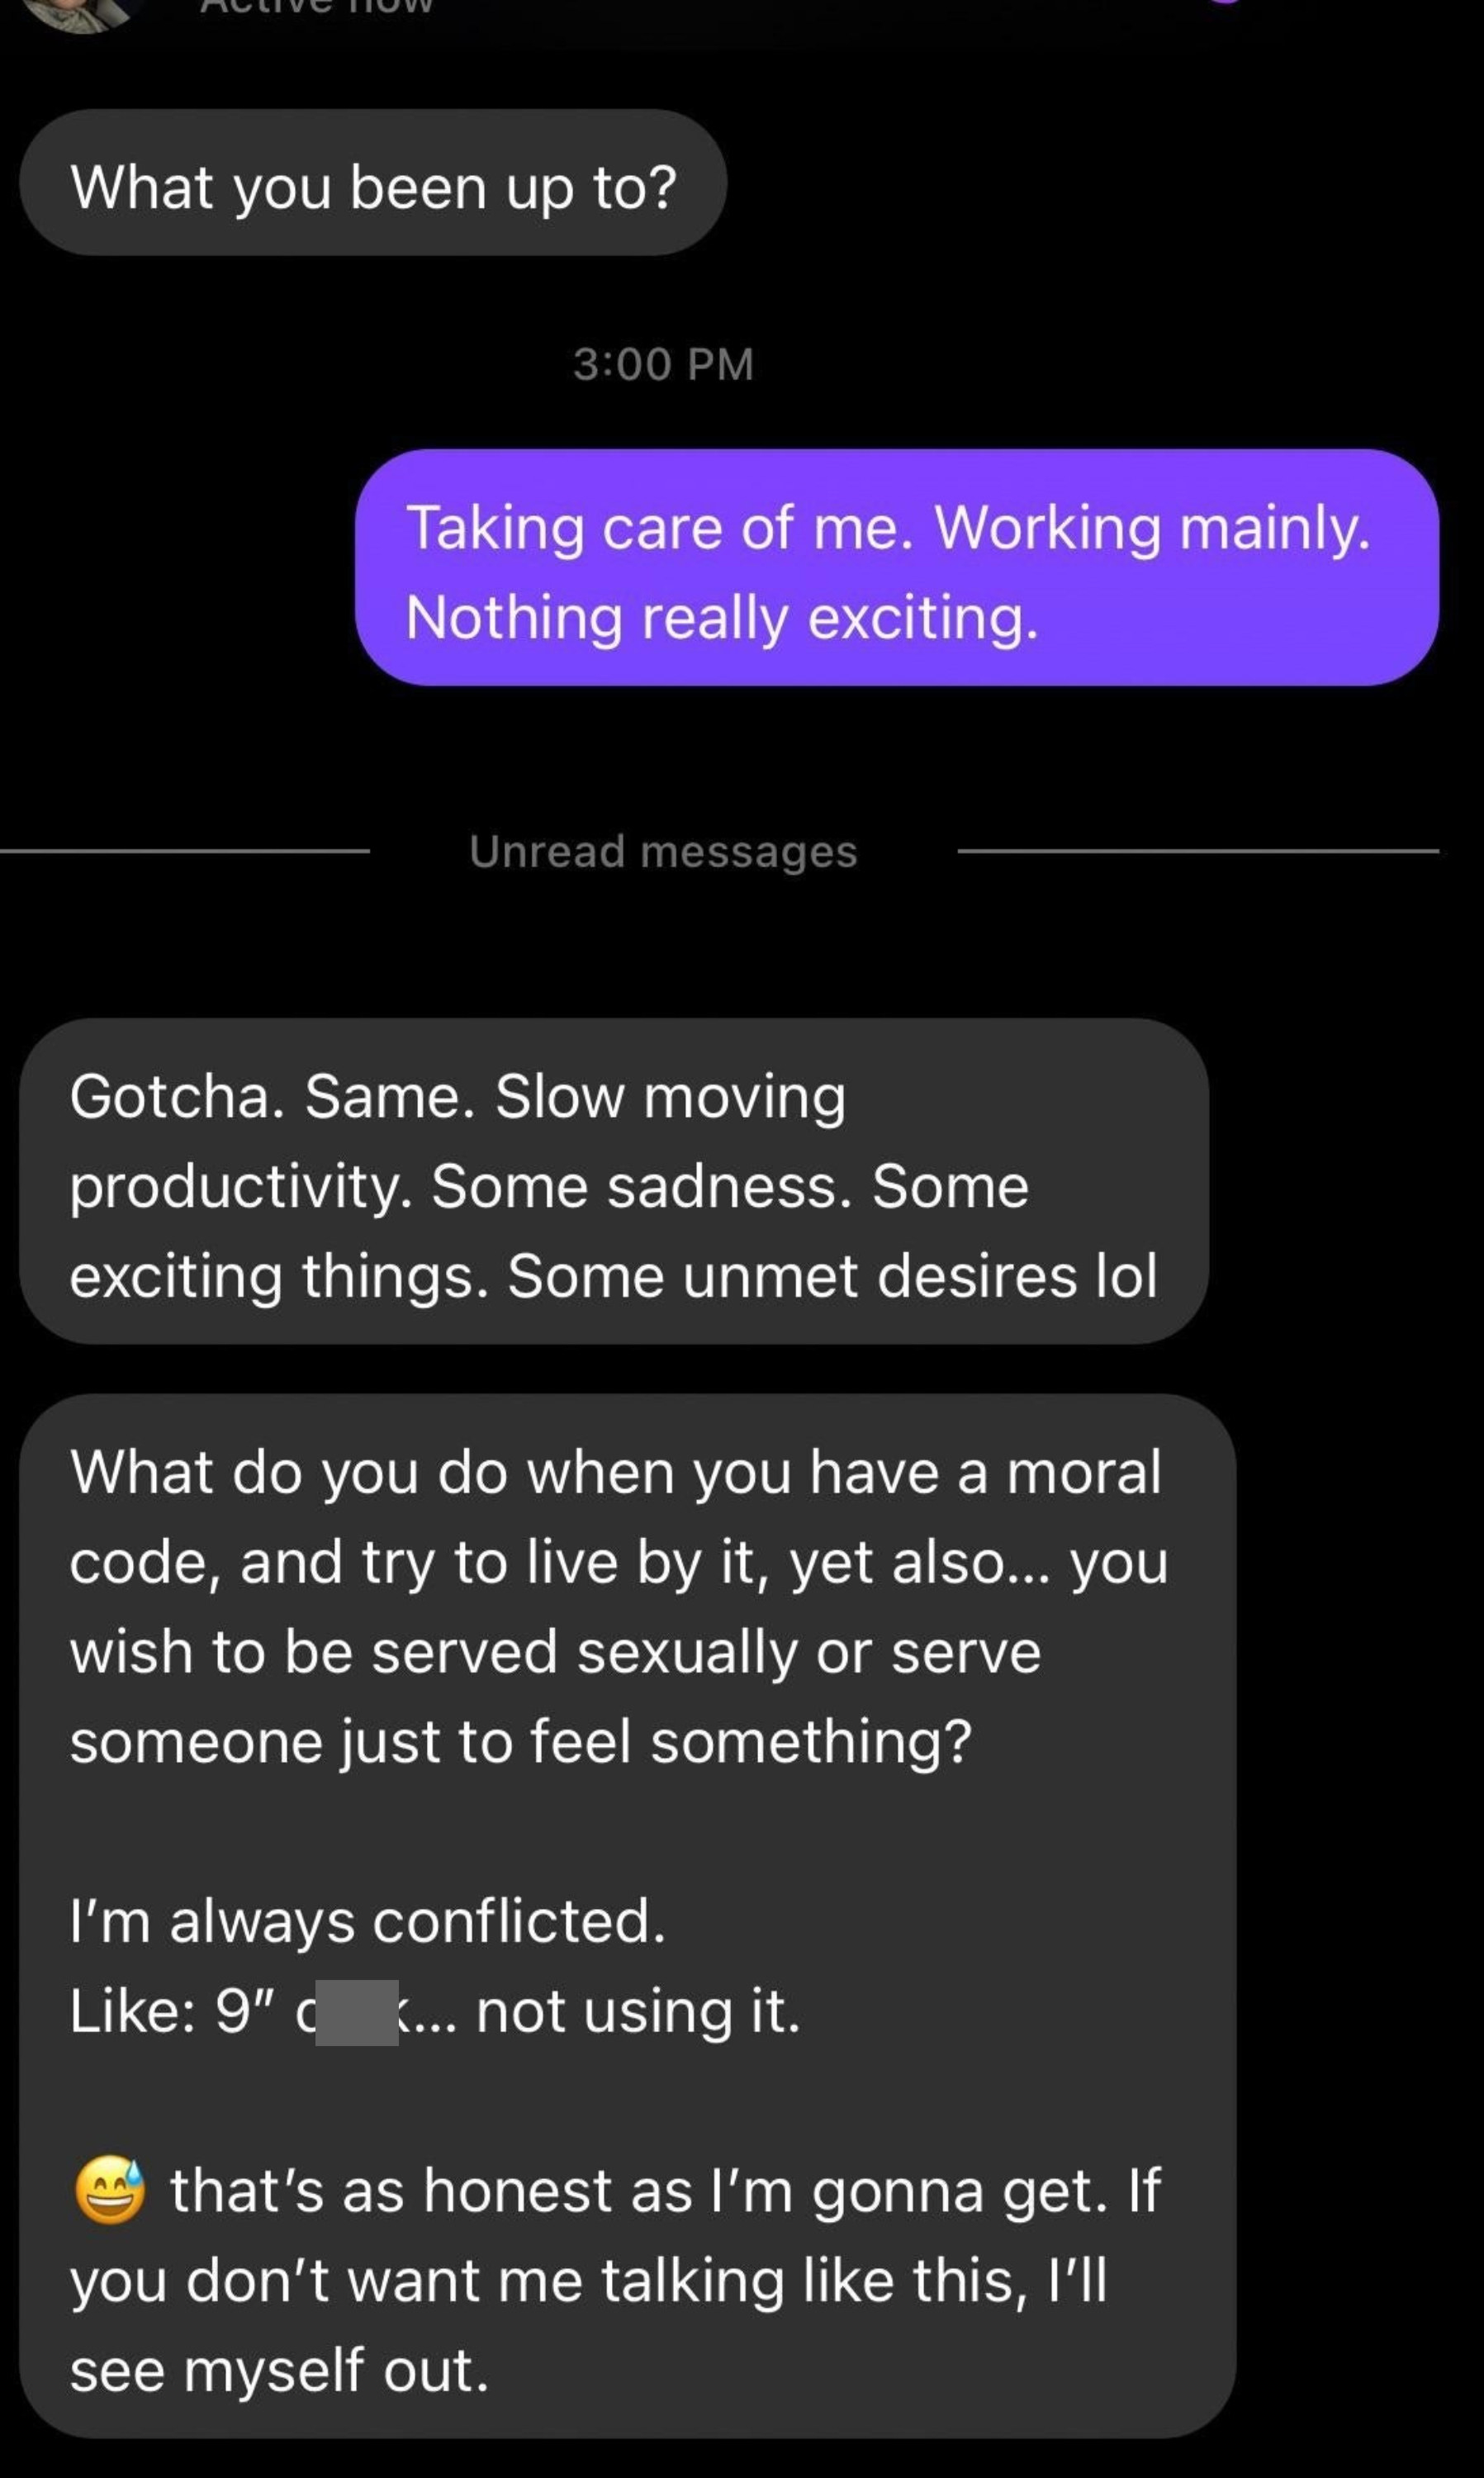 Person asks what they&#x27;ve been up to, they say &quot;Taking care of me, working,&quot; and person says, &quot;Gotcha, same,&quot; then asks what do you do when you want to live by a moral code but want to be served/serve sexually, then refer to their unused 9-inch cock